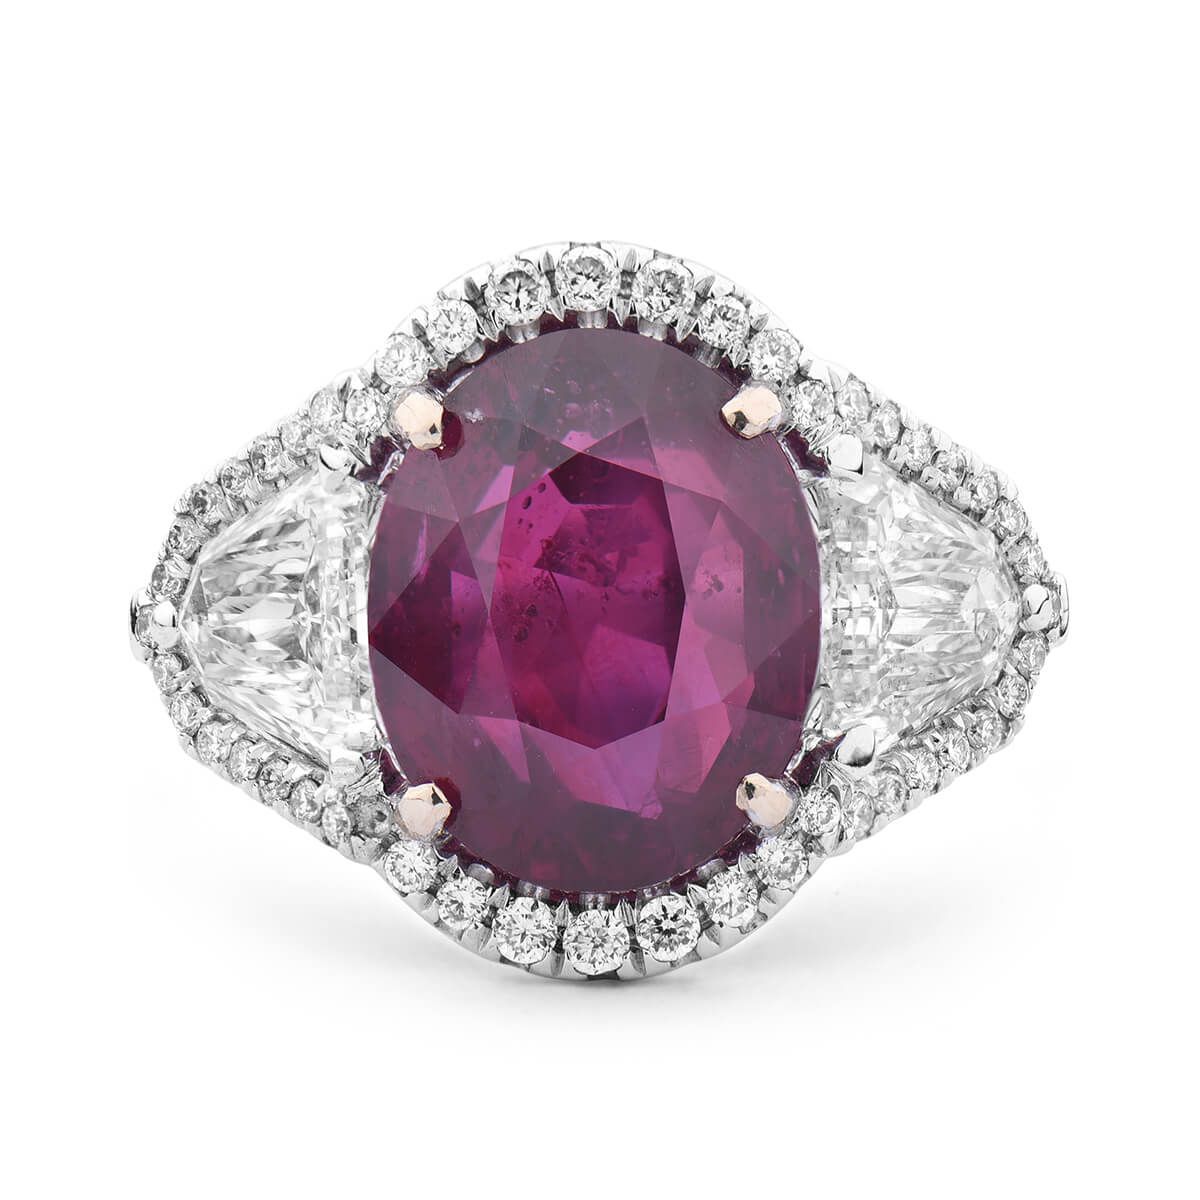 Natural Red Mozambique Ruby Ring, 8.18 Ct. (9.68 Ct. TW), GUBELIN Certified, 18011168, Unheated